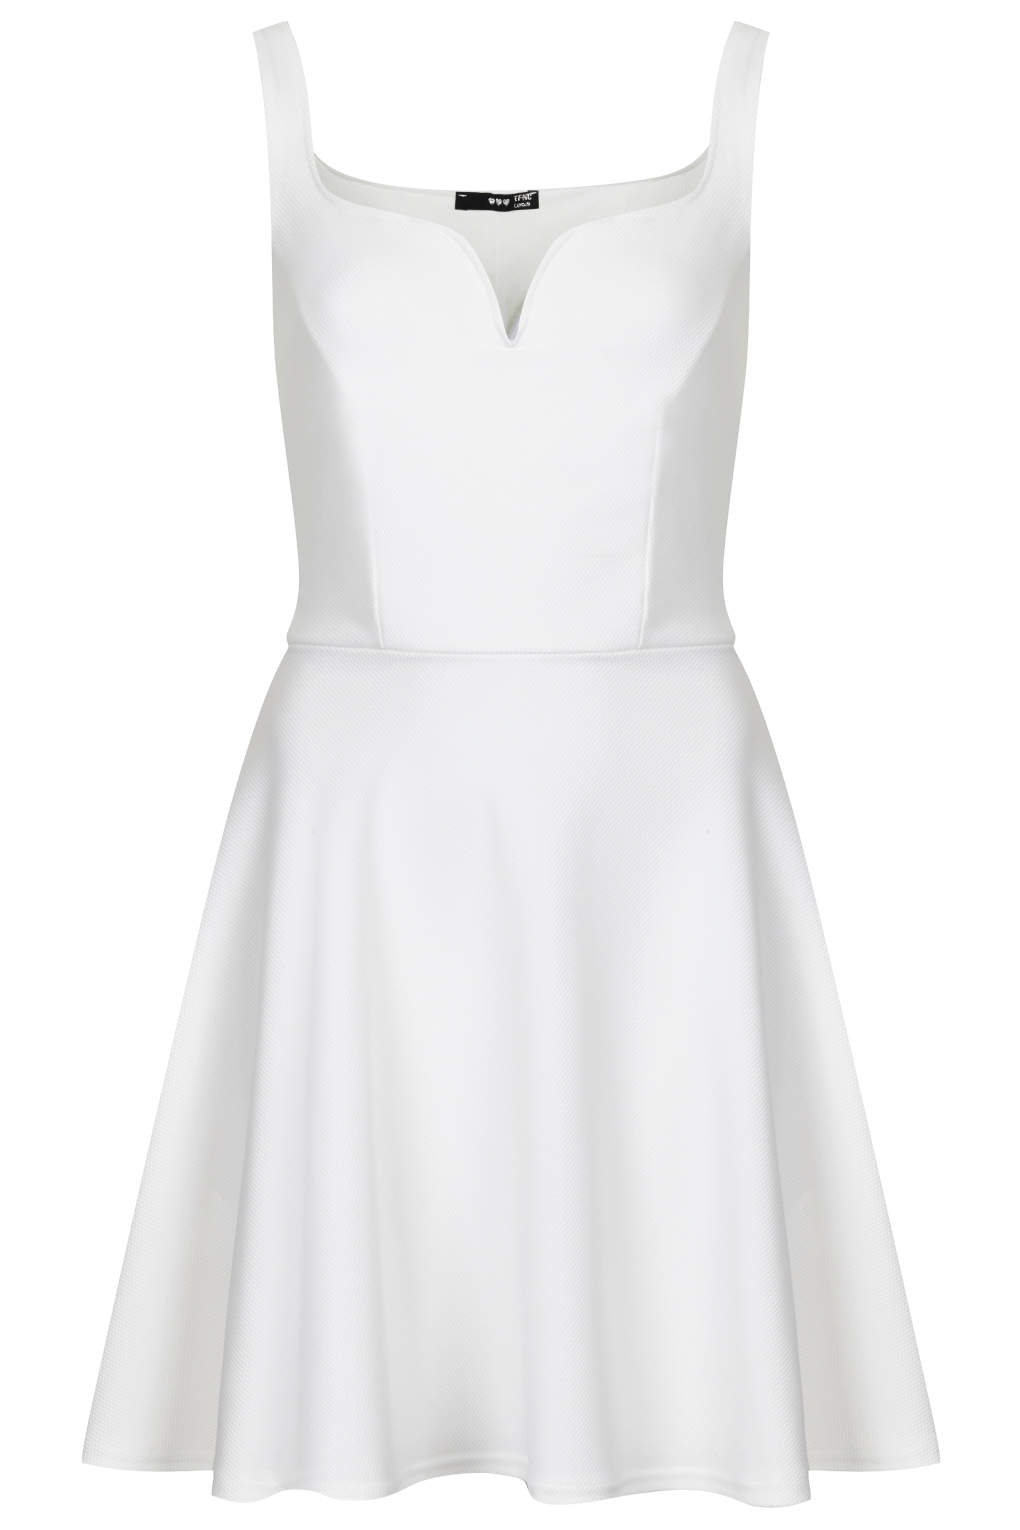 Topshop Mano Skater Dress By Tfnc in White | Lyst